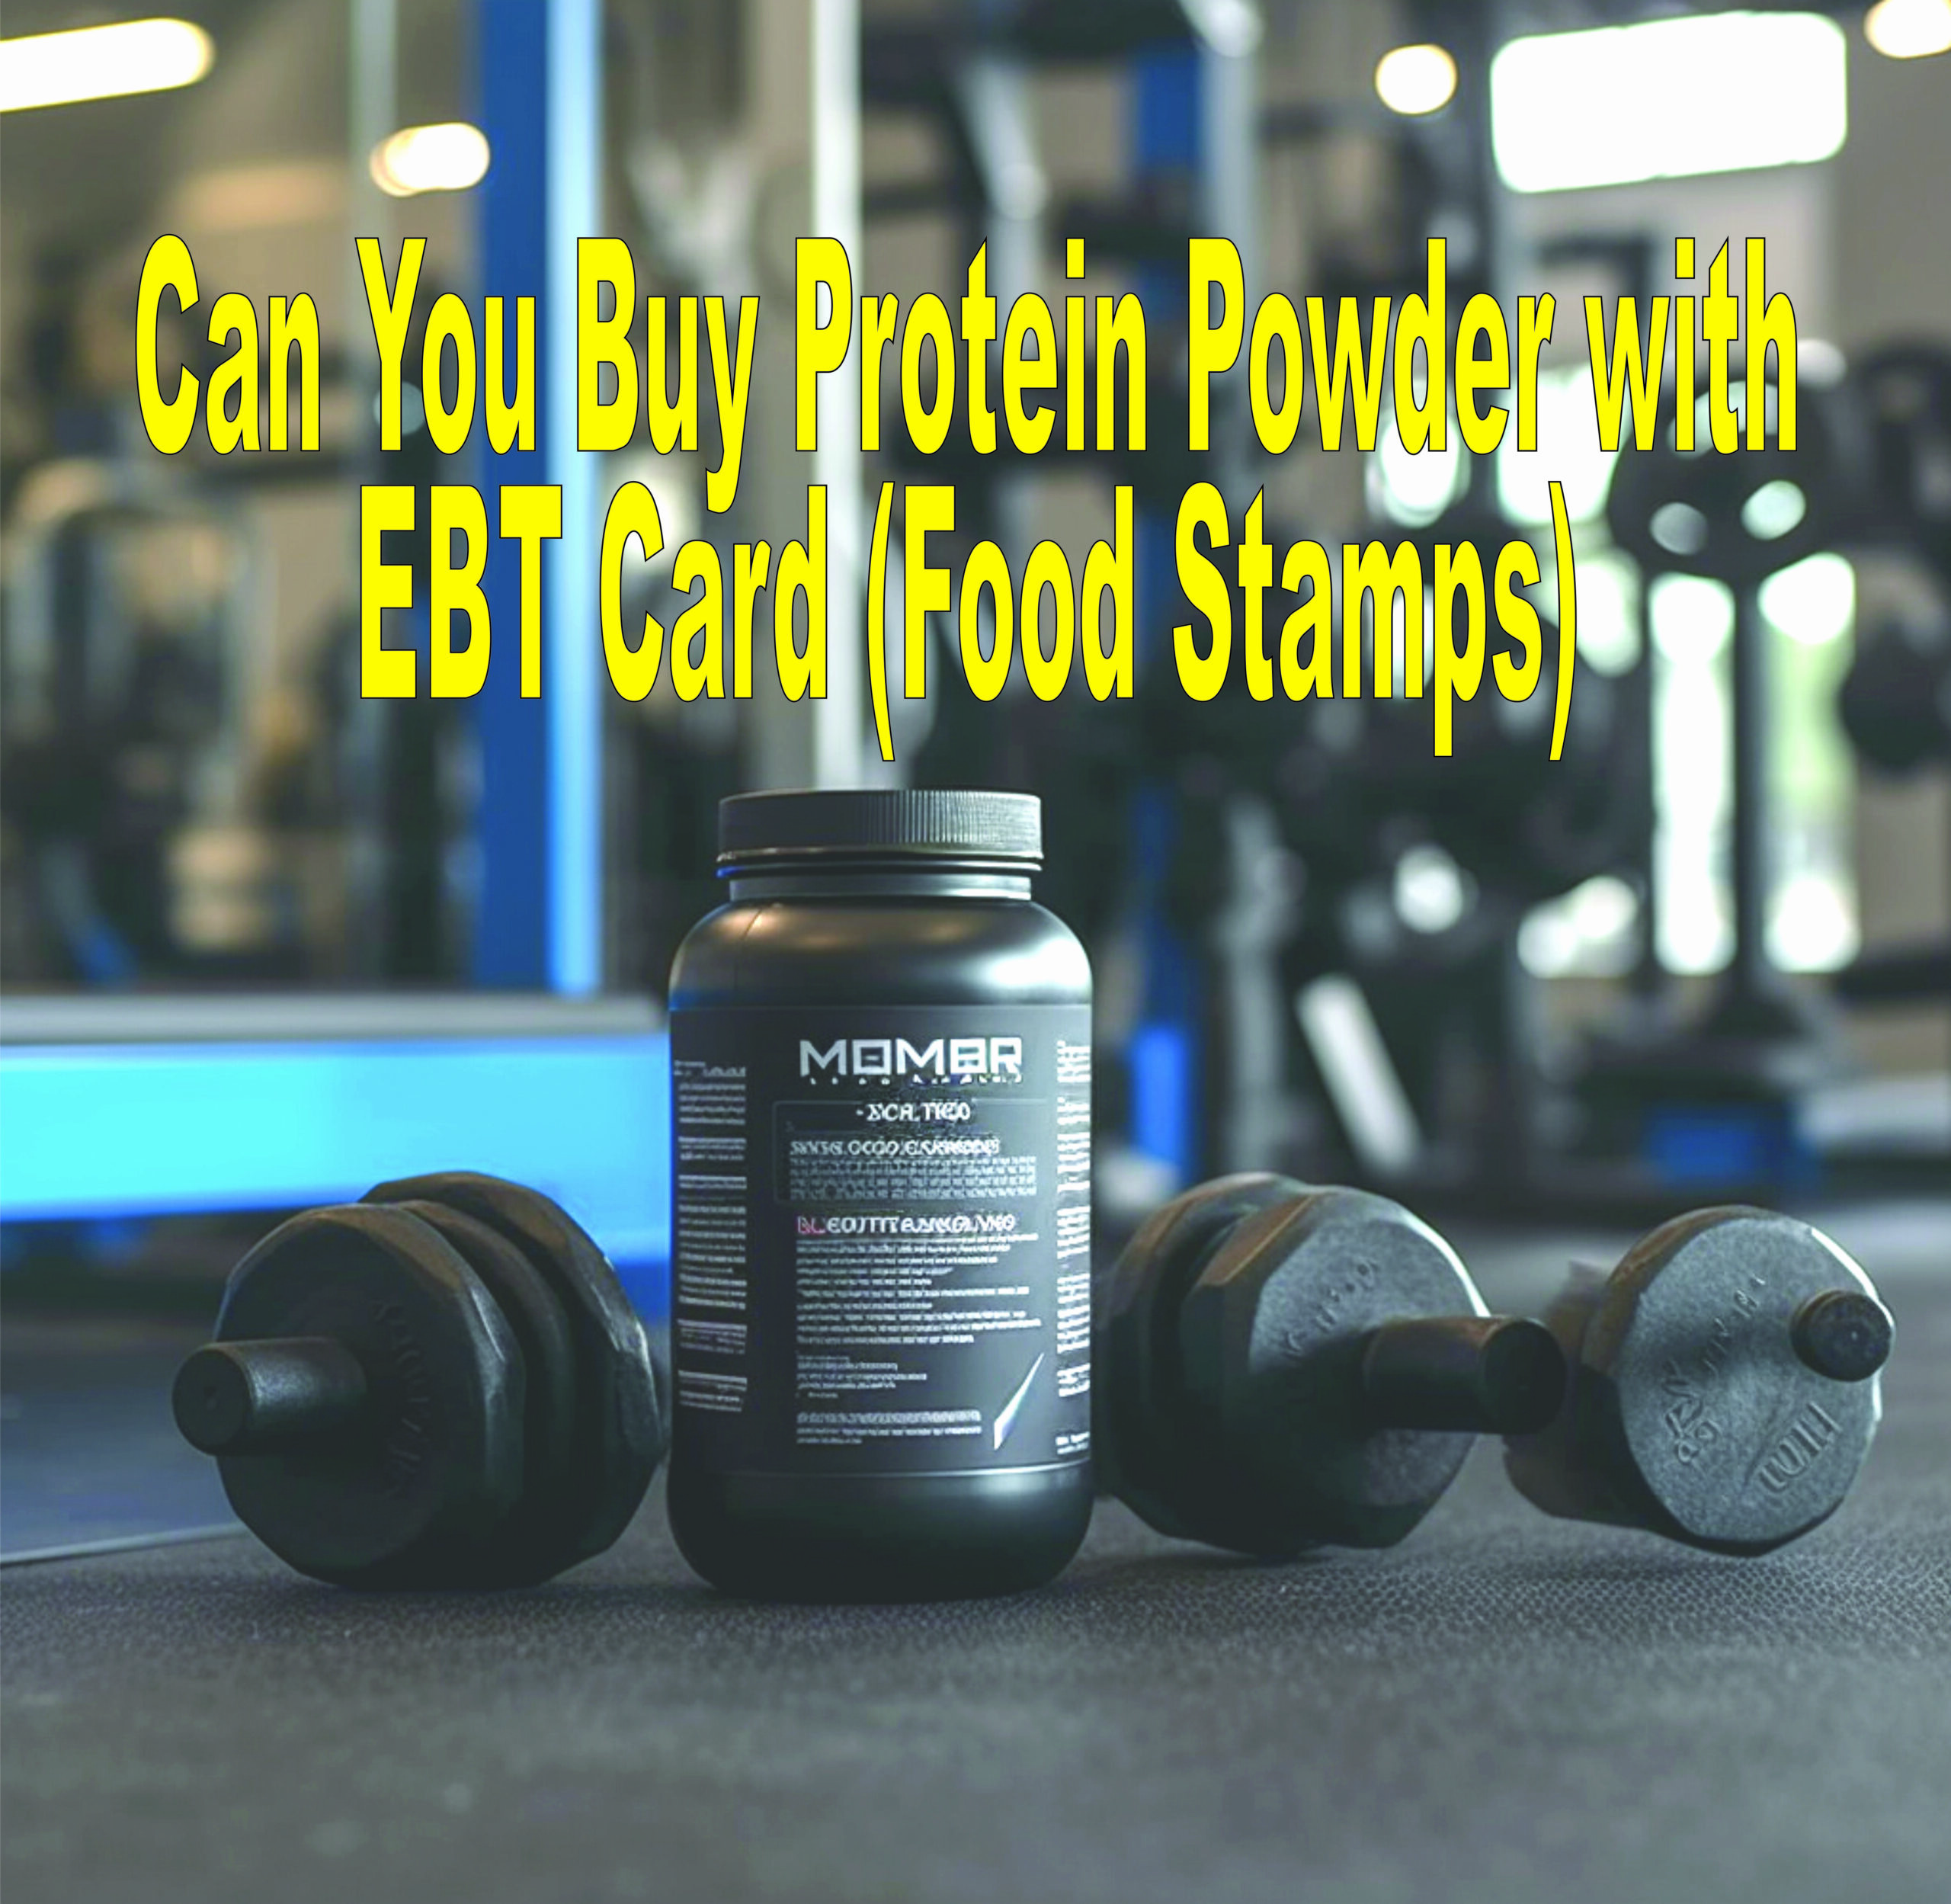 Can You Buy Protein Powder With Ebt Card (food Stamps)